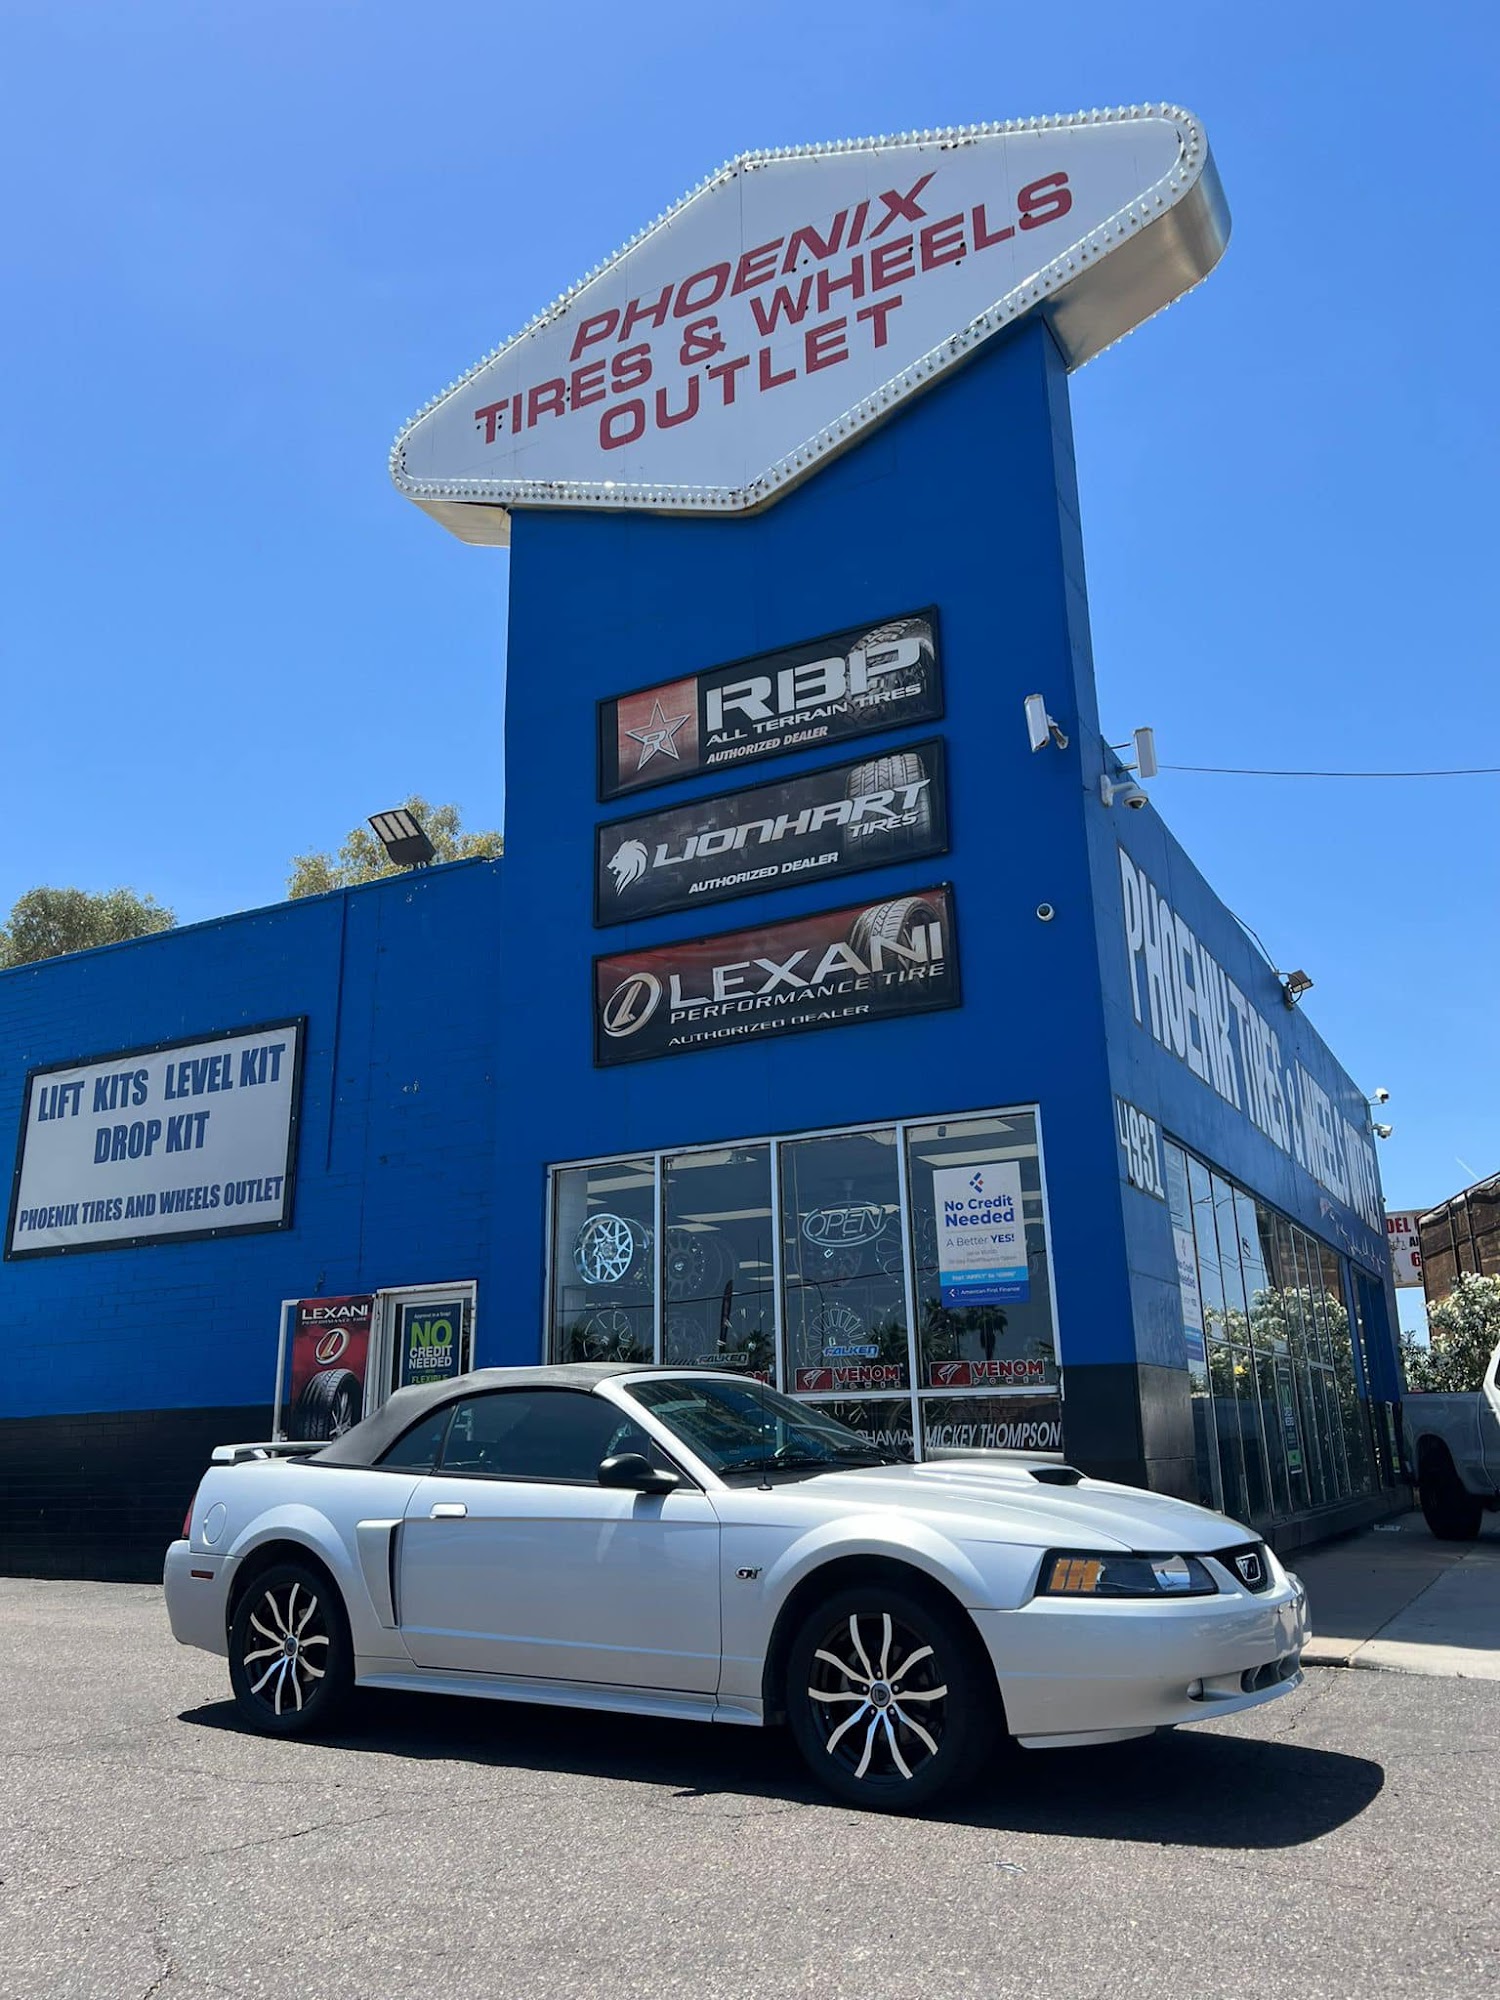 PHOENIX TIRES AND WHEELS OUTLET